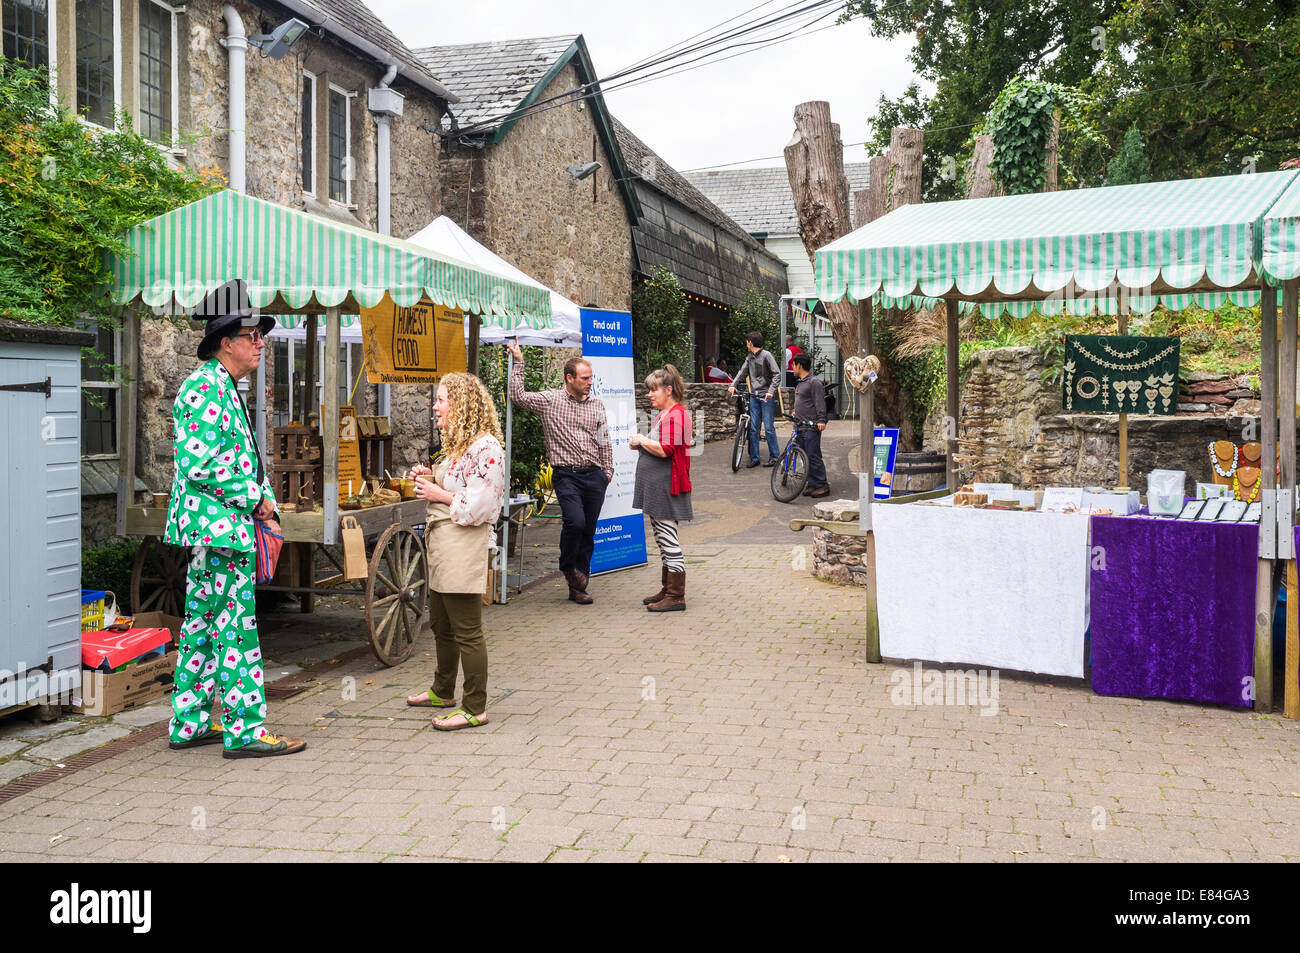 Dartington Devon England. A magician wearing a green suit decorated with Aces from a card deck and gambling chips. Stock Photo